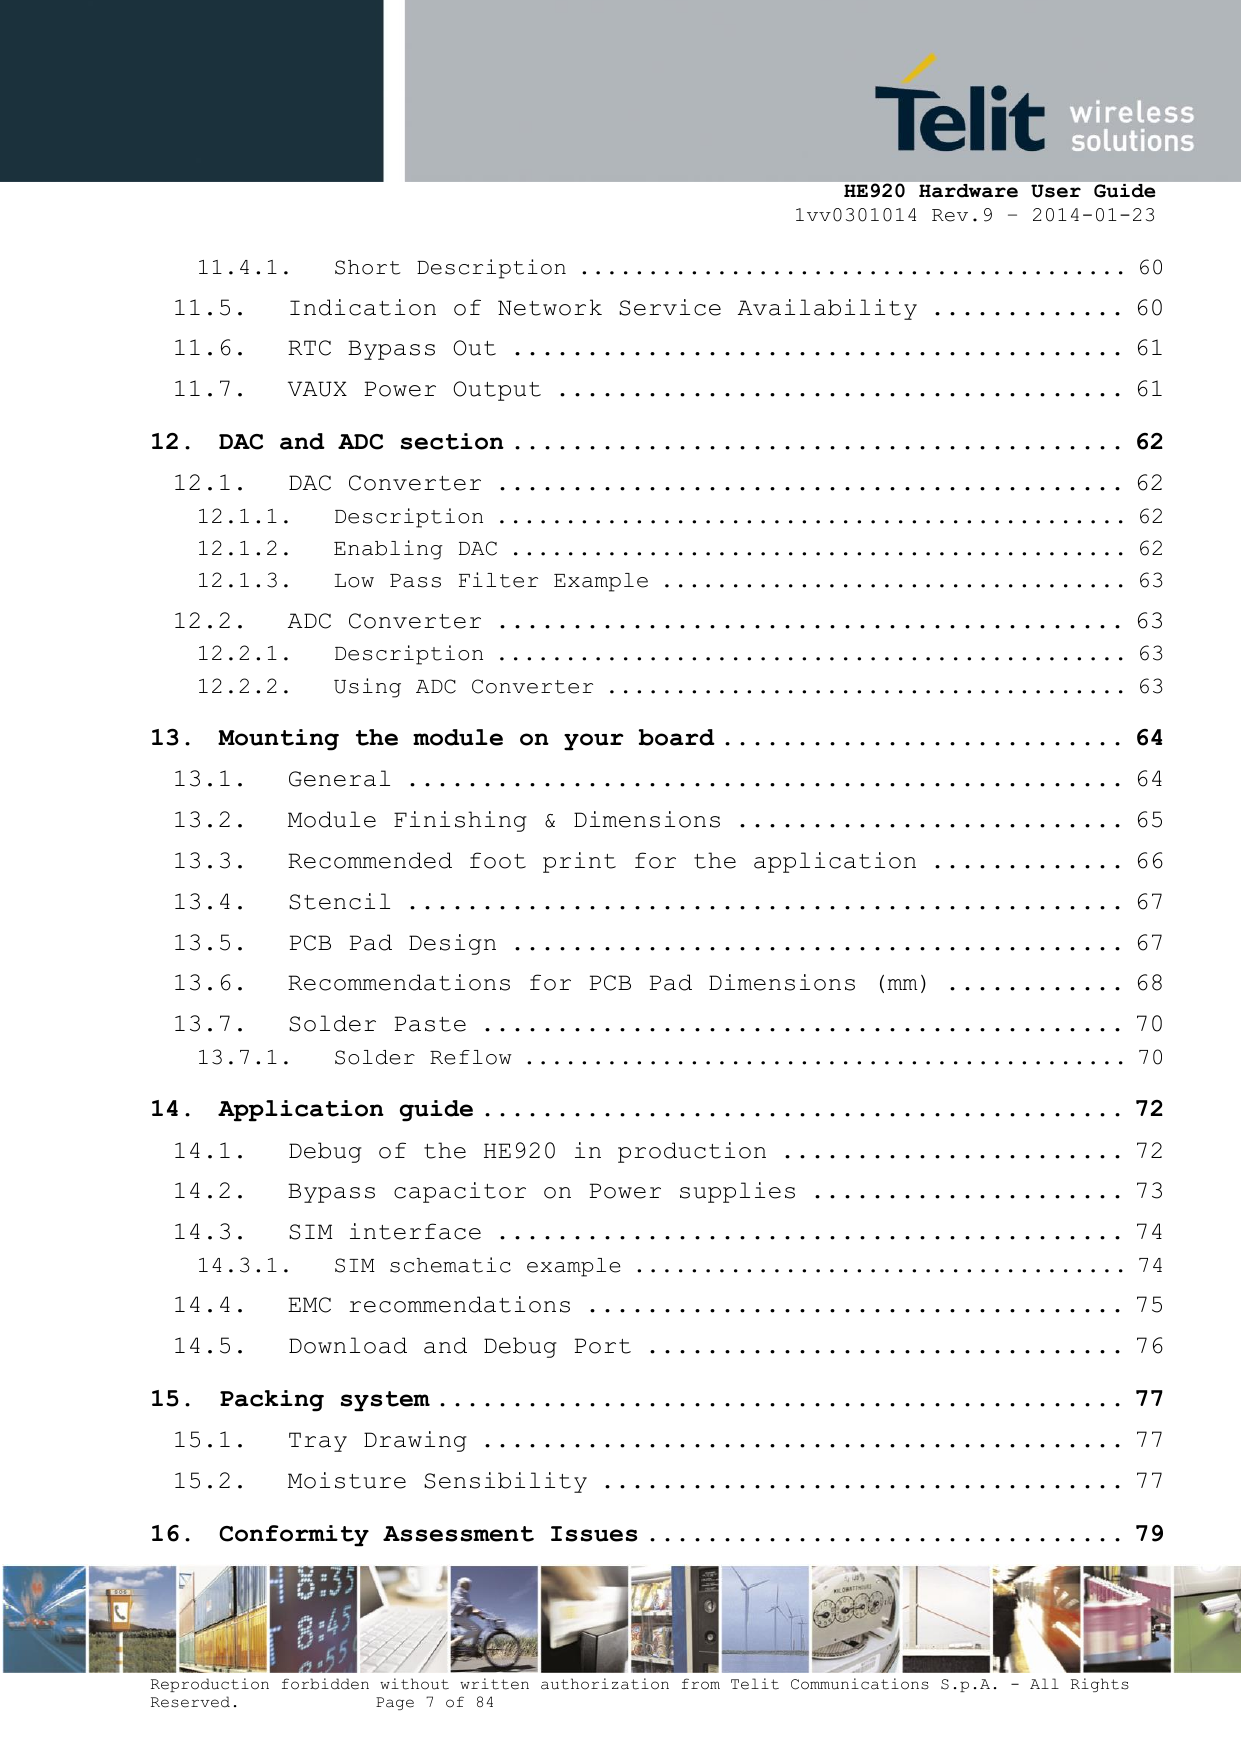     HE920 Hardware User Guide 1vv0301014 Rev.9 – 2014-01-23 Reproduction forbidden without written authorization from Telit Communications S.p.A. - All Rights Reserved.    Page 7 of 84  11.4.1. Short Description ........................................ 60 11.5. Indication of Network Service Availability ............. 60 11.6. RTC Bypass Out ......................................... 61 11.7. VAUX Power Output ...................................... 61 12. DAC and ADC section ......................................... 62 12.1. DAC Converter .......................................... 62 12.1.1. Description .............................................. 62 12.1.2. Enabling DAC ............................................. 62 12.1.3. Low Pass Filter Example .................................. 63 12.2. ADC Converter .......................................... 63 12.2.1. Description .............................................. 63 12.2.2. Using ADC Converter ...................................... 63 13. Mounting the module on your board ........................... 64 13.1. General ................................................ 64 13.2. Module Finishing &amp; Dimensions .......................... 65 13.3. Recommended foot print for the application ............. 66 13.4. Stencil ................................................ 67 13.5. PCB Pad Design ......................................... 67 13.6. Recommendations for PCB Pad Dimensions (mm) ............ 68 13.7. Solder Paste ........................................... 70 13.7.1. Solder Reflow ............................................ 70 14. Application guide ........................................... 72 14.1. Debug of the HE920 in production ....................... 72 14.2. Bypass capacitor on Power supplies ..................... 73 14.3. SIM interface .......................................... 74 14.3.1. SIM schematic example .................................... 74 14.4. EMC recommendations .................................... 75 14.5. Download and Debug Port ................................ 76 15. Packing system .............................................. 77 15.1. Tray Drawing ........................................... 77 15.2. Moisture Sensibility ................................... 77 16. Conformity Assessment Issues ................................ 79 